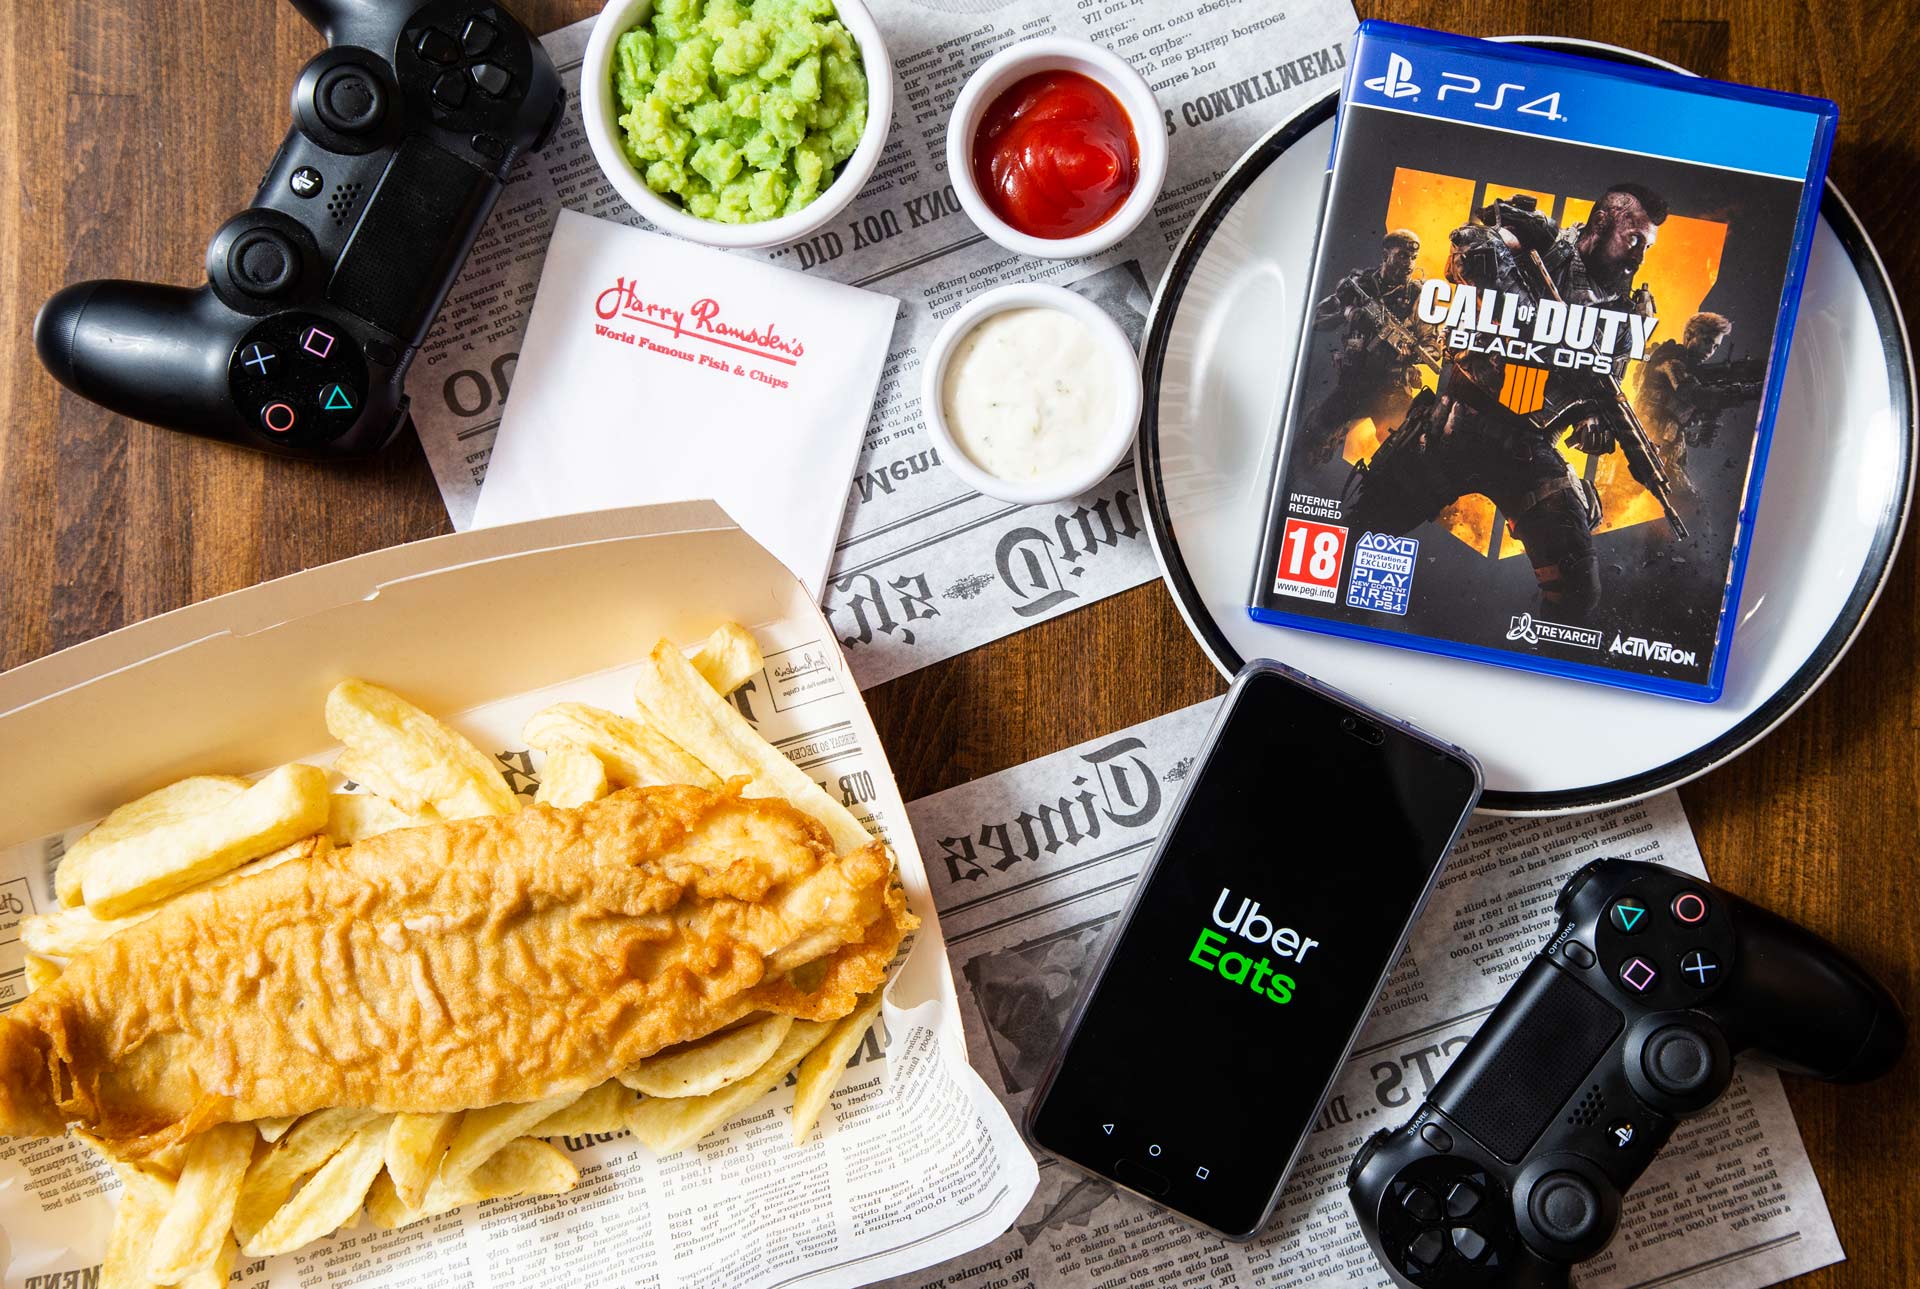 Uber Eats Get Call Of Duty Black Ops 4 Plus Fish Chips For 7 99 Vgu